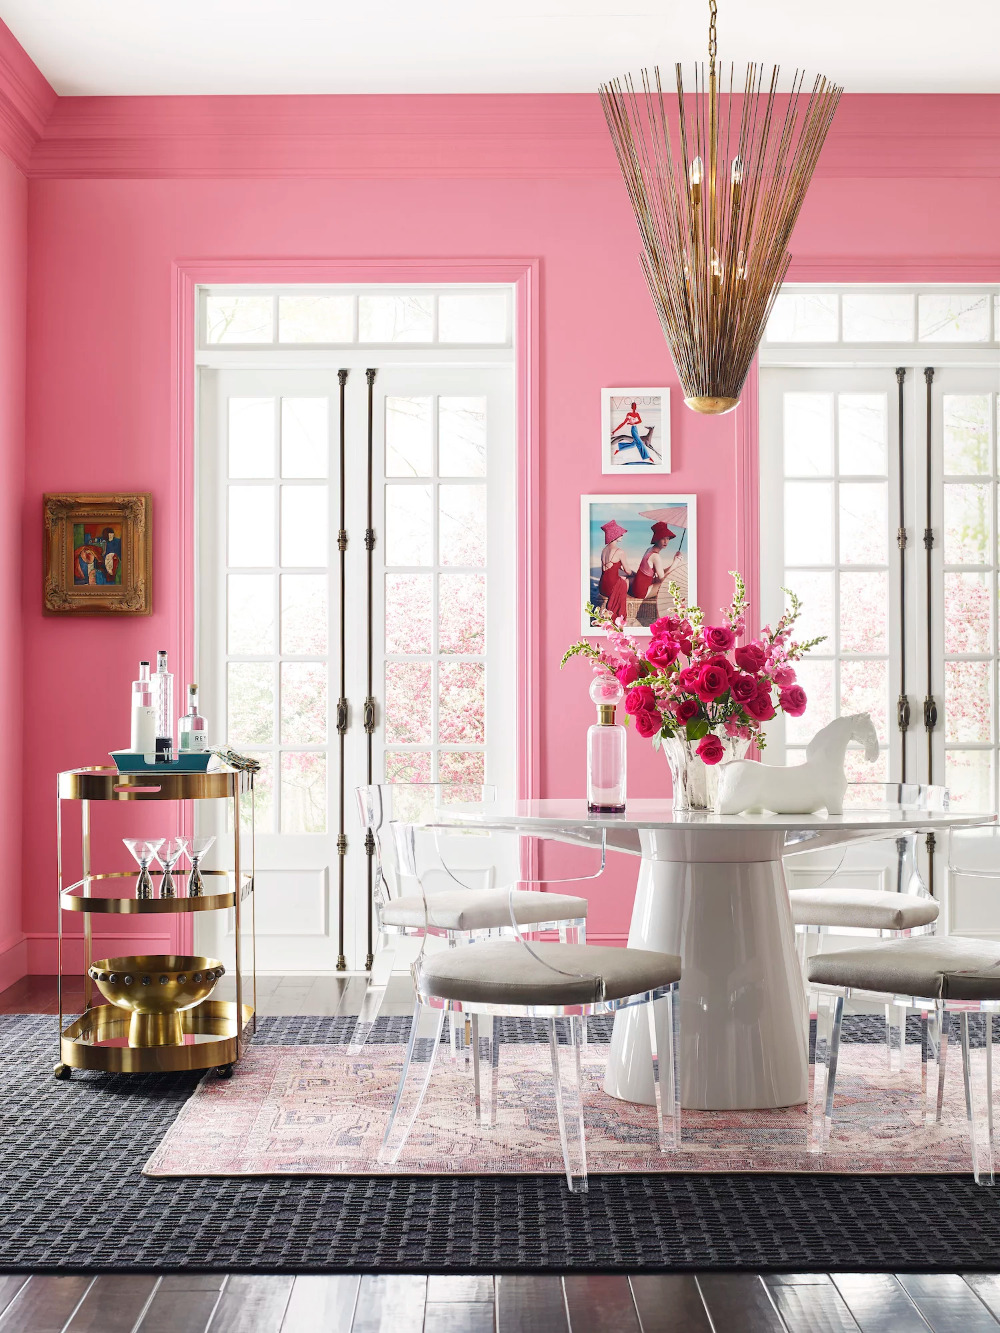 sherwin williams predicts these will be the top paint color trends of 2021